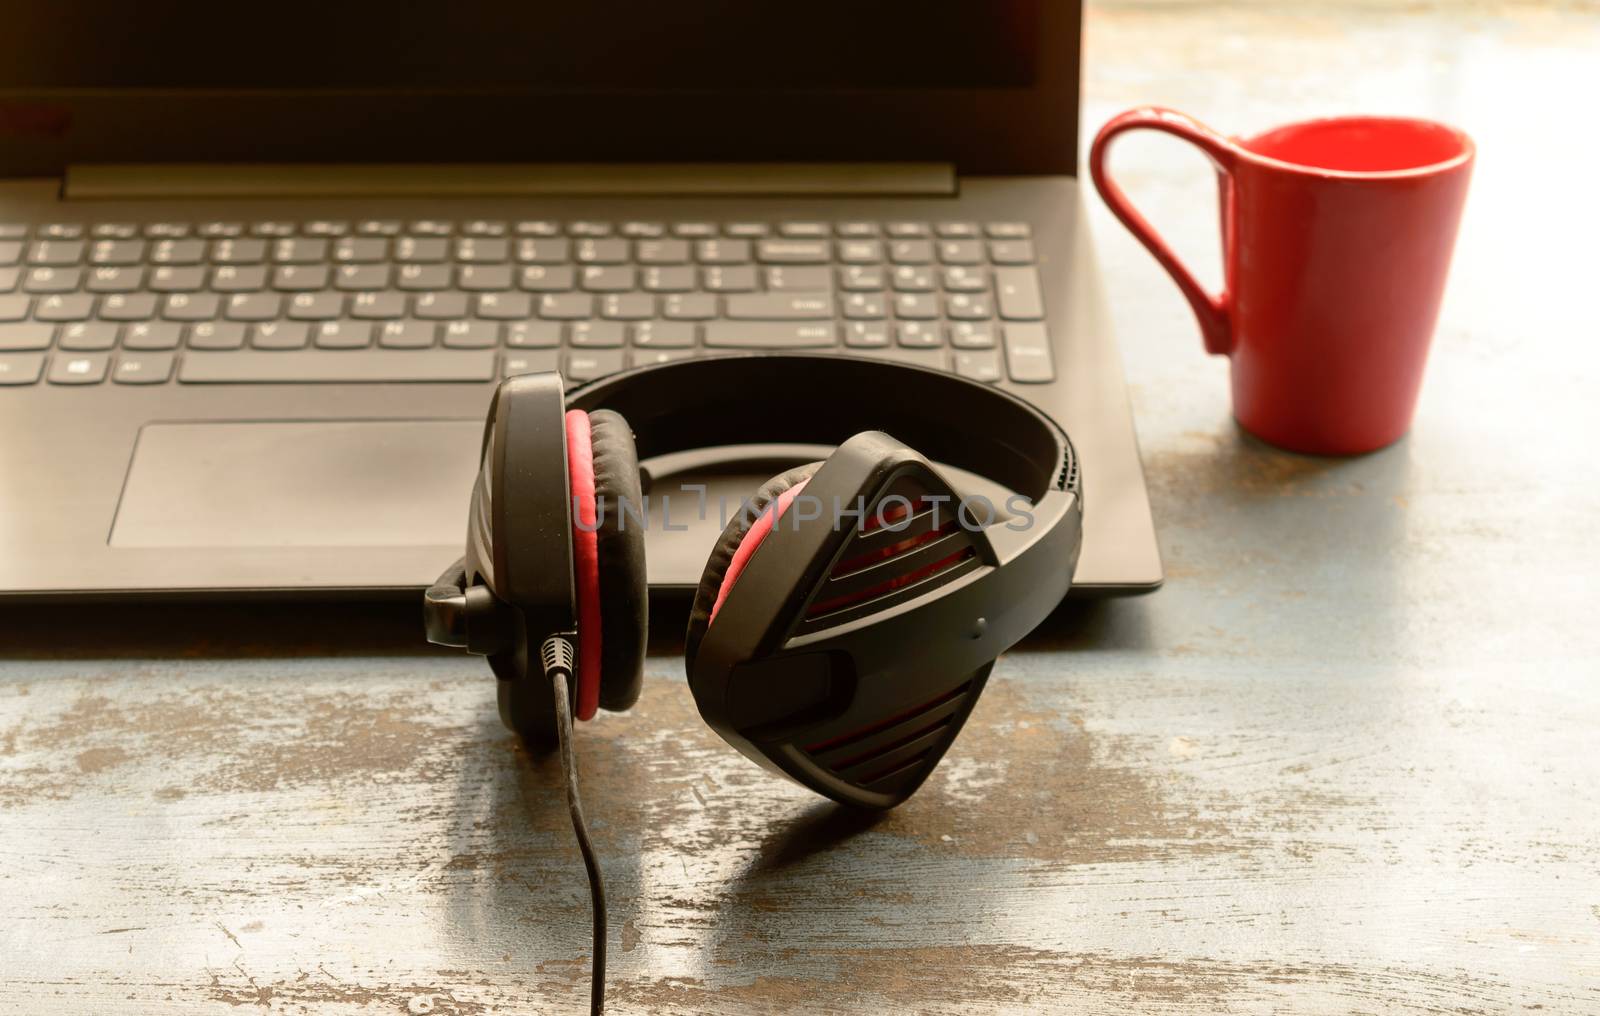 Portable over-ear Binaural Sound USB Headset with Microphone Noise Cancelling and Ultrasonic Volume Adjuster Headphone for Computer, Skype placed near laptop on window sunlight in morning. Red Cup of Coffee at a distance. Stay home, Work from home, Remote Work, Business Continuity background.